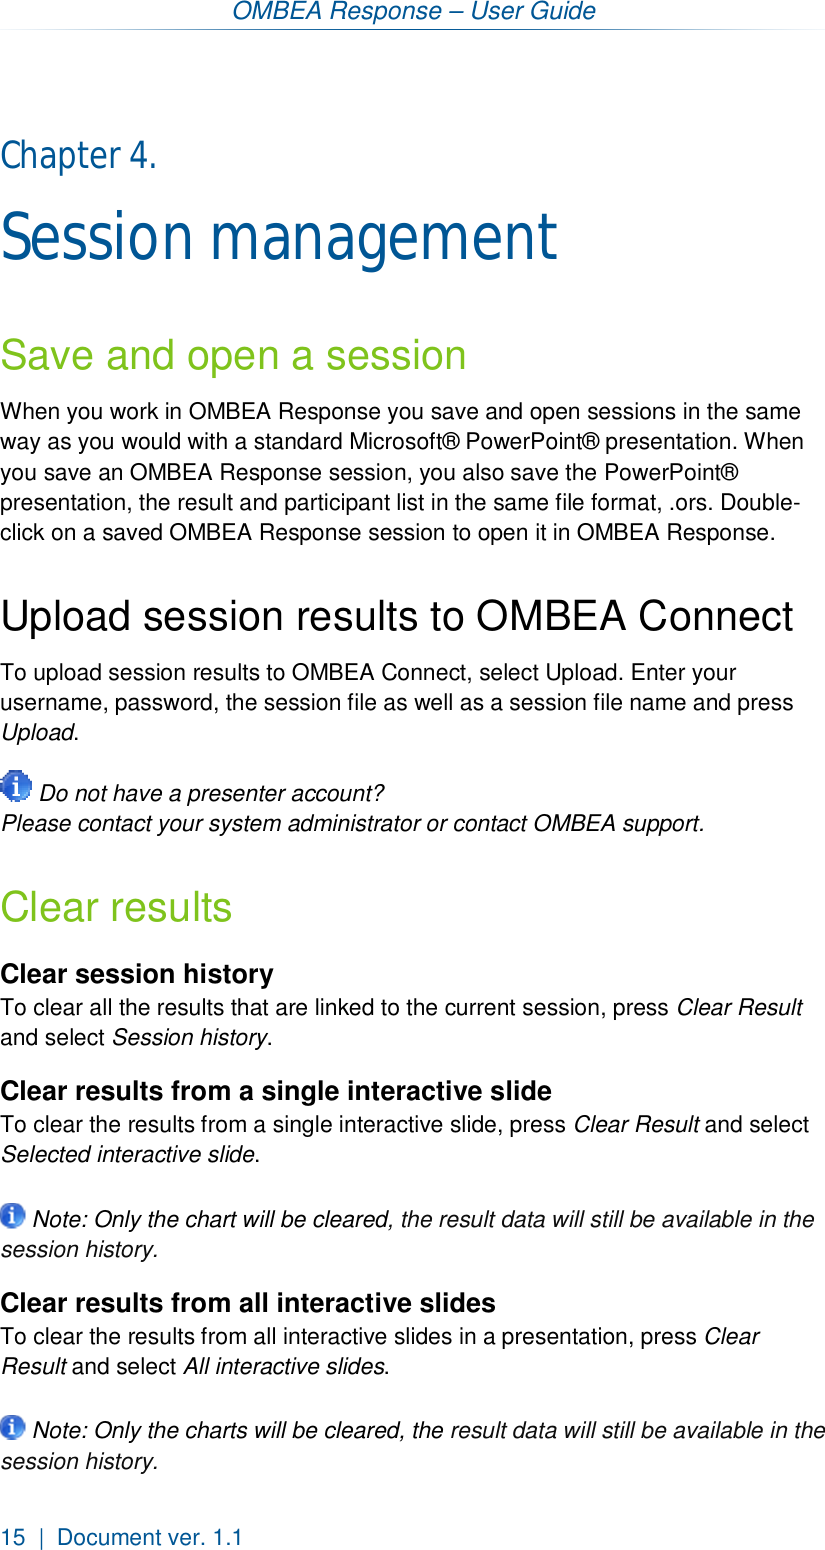 OMBEA Response – User Guide 15  |  Document ver. 1.1  Chapter 4.  Session management Save and open a session When you work in OMBEA Response you save and open sessions in the same way as you would with a standard Microsoft® PowerPoint® presentation. When you save an OMBEA Response session, you also save the PowerPoint® presentation, the result and participant list in the same file format, .ors. Double-click on a saved OMBEA Response session to open it in OMBEA Response.  Upload session results to OMBEA Connect To upload session results to OMBEA Connect, select Upload. Enter your username, password, the session file as well as a session file name and press Upload.   Do not have a presenter account? Please contact your system administrator or contact OMBEA support. Clear results Clear session history To clear all the results that are linked to the current session, press Clear Result and select Session history. Clear results from a single interactive slide To clear the results from a single interactive slide, press Clear Result and select Selected interactive slide.    Note: Only the chart will be cleared, the result data will still be available in the session history. Clear results from all interactive slides  To clear the results from all interactive slides in a presentation, press Clear Result and select All interactive slides.    Note: Only the charts will be cleared, the result data will still be available in the session history.   